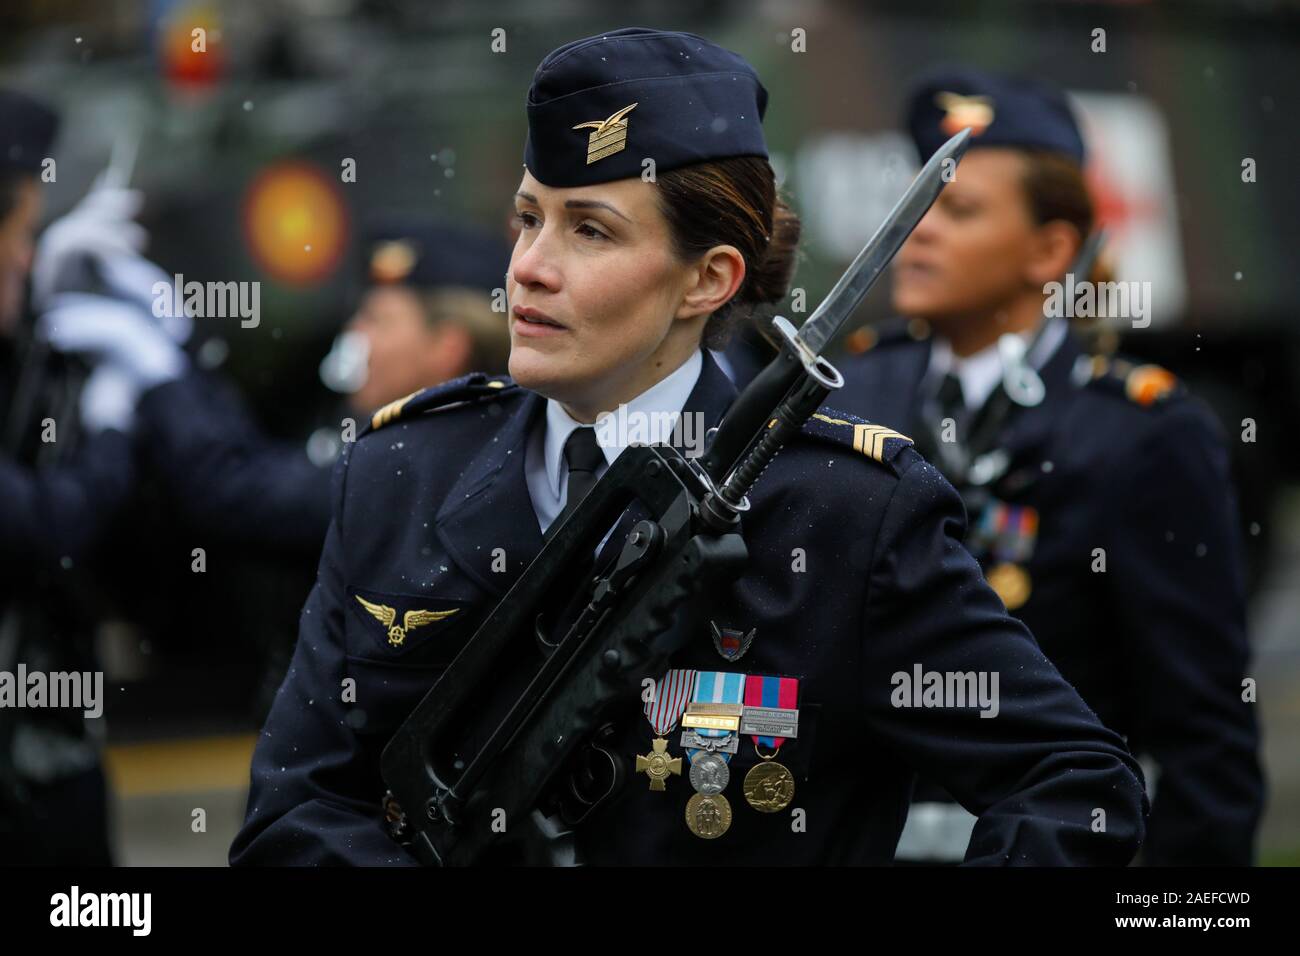 Bucharest, Romania - December 01, 2019: French female soldier attaches a bayonet to her gun during the Romanian National Day military parade during a Stock Photo